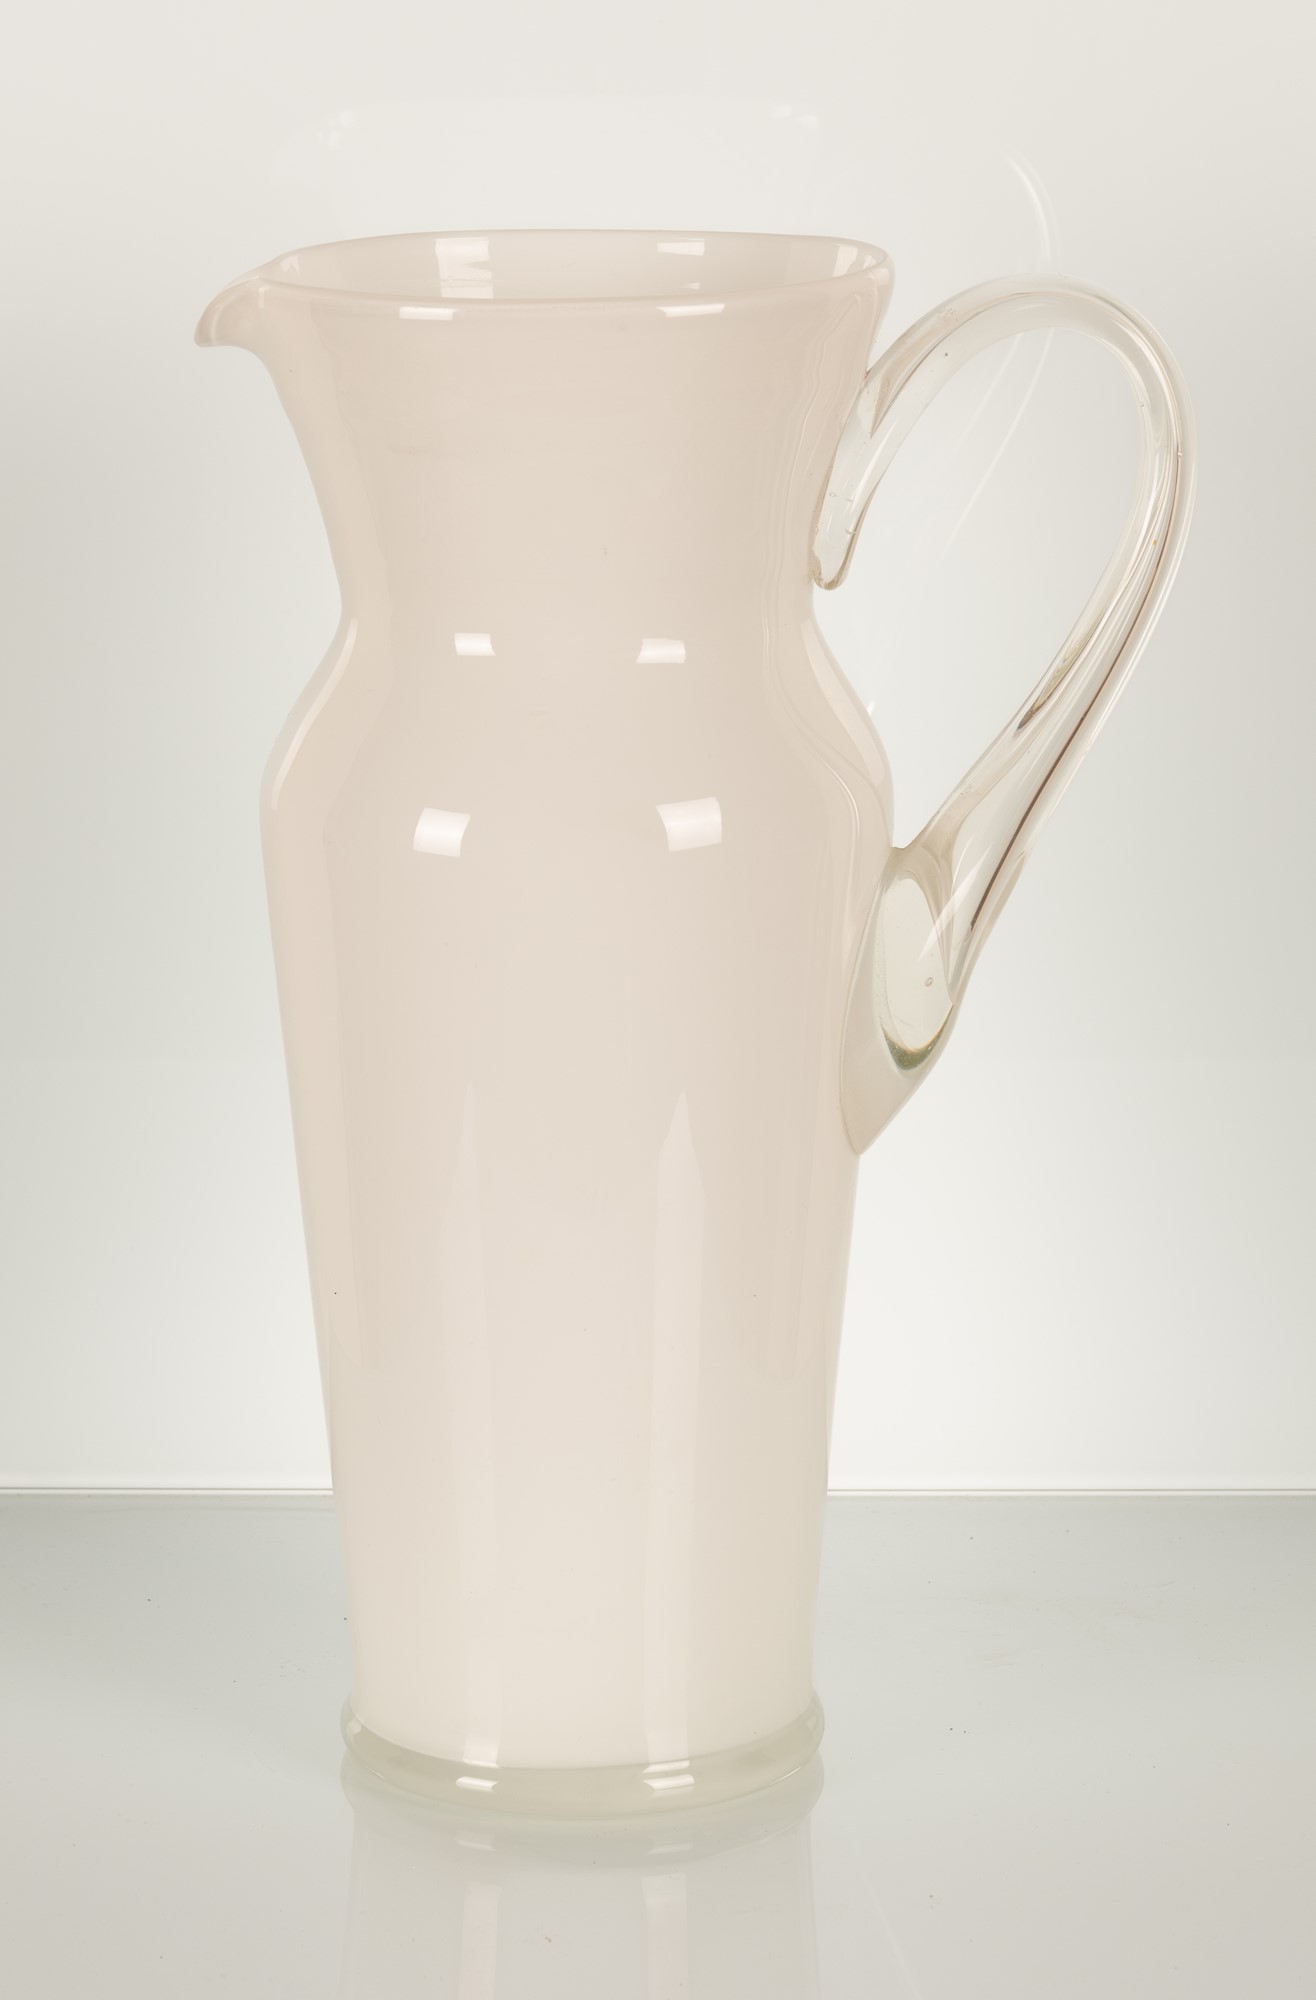 White glass carafe - Image 3 of 19